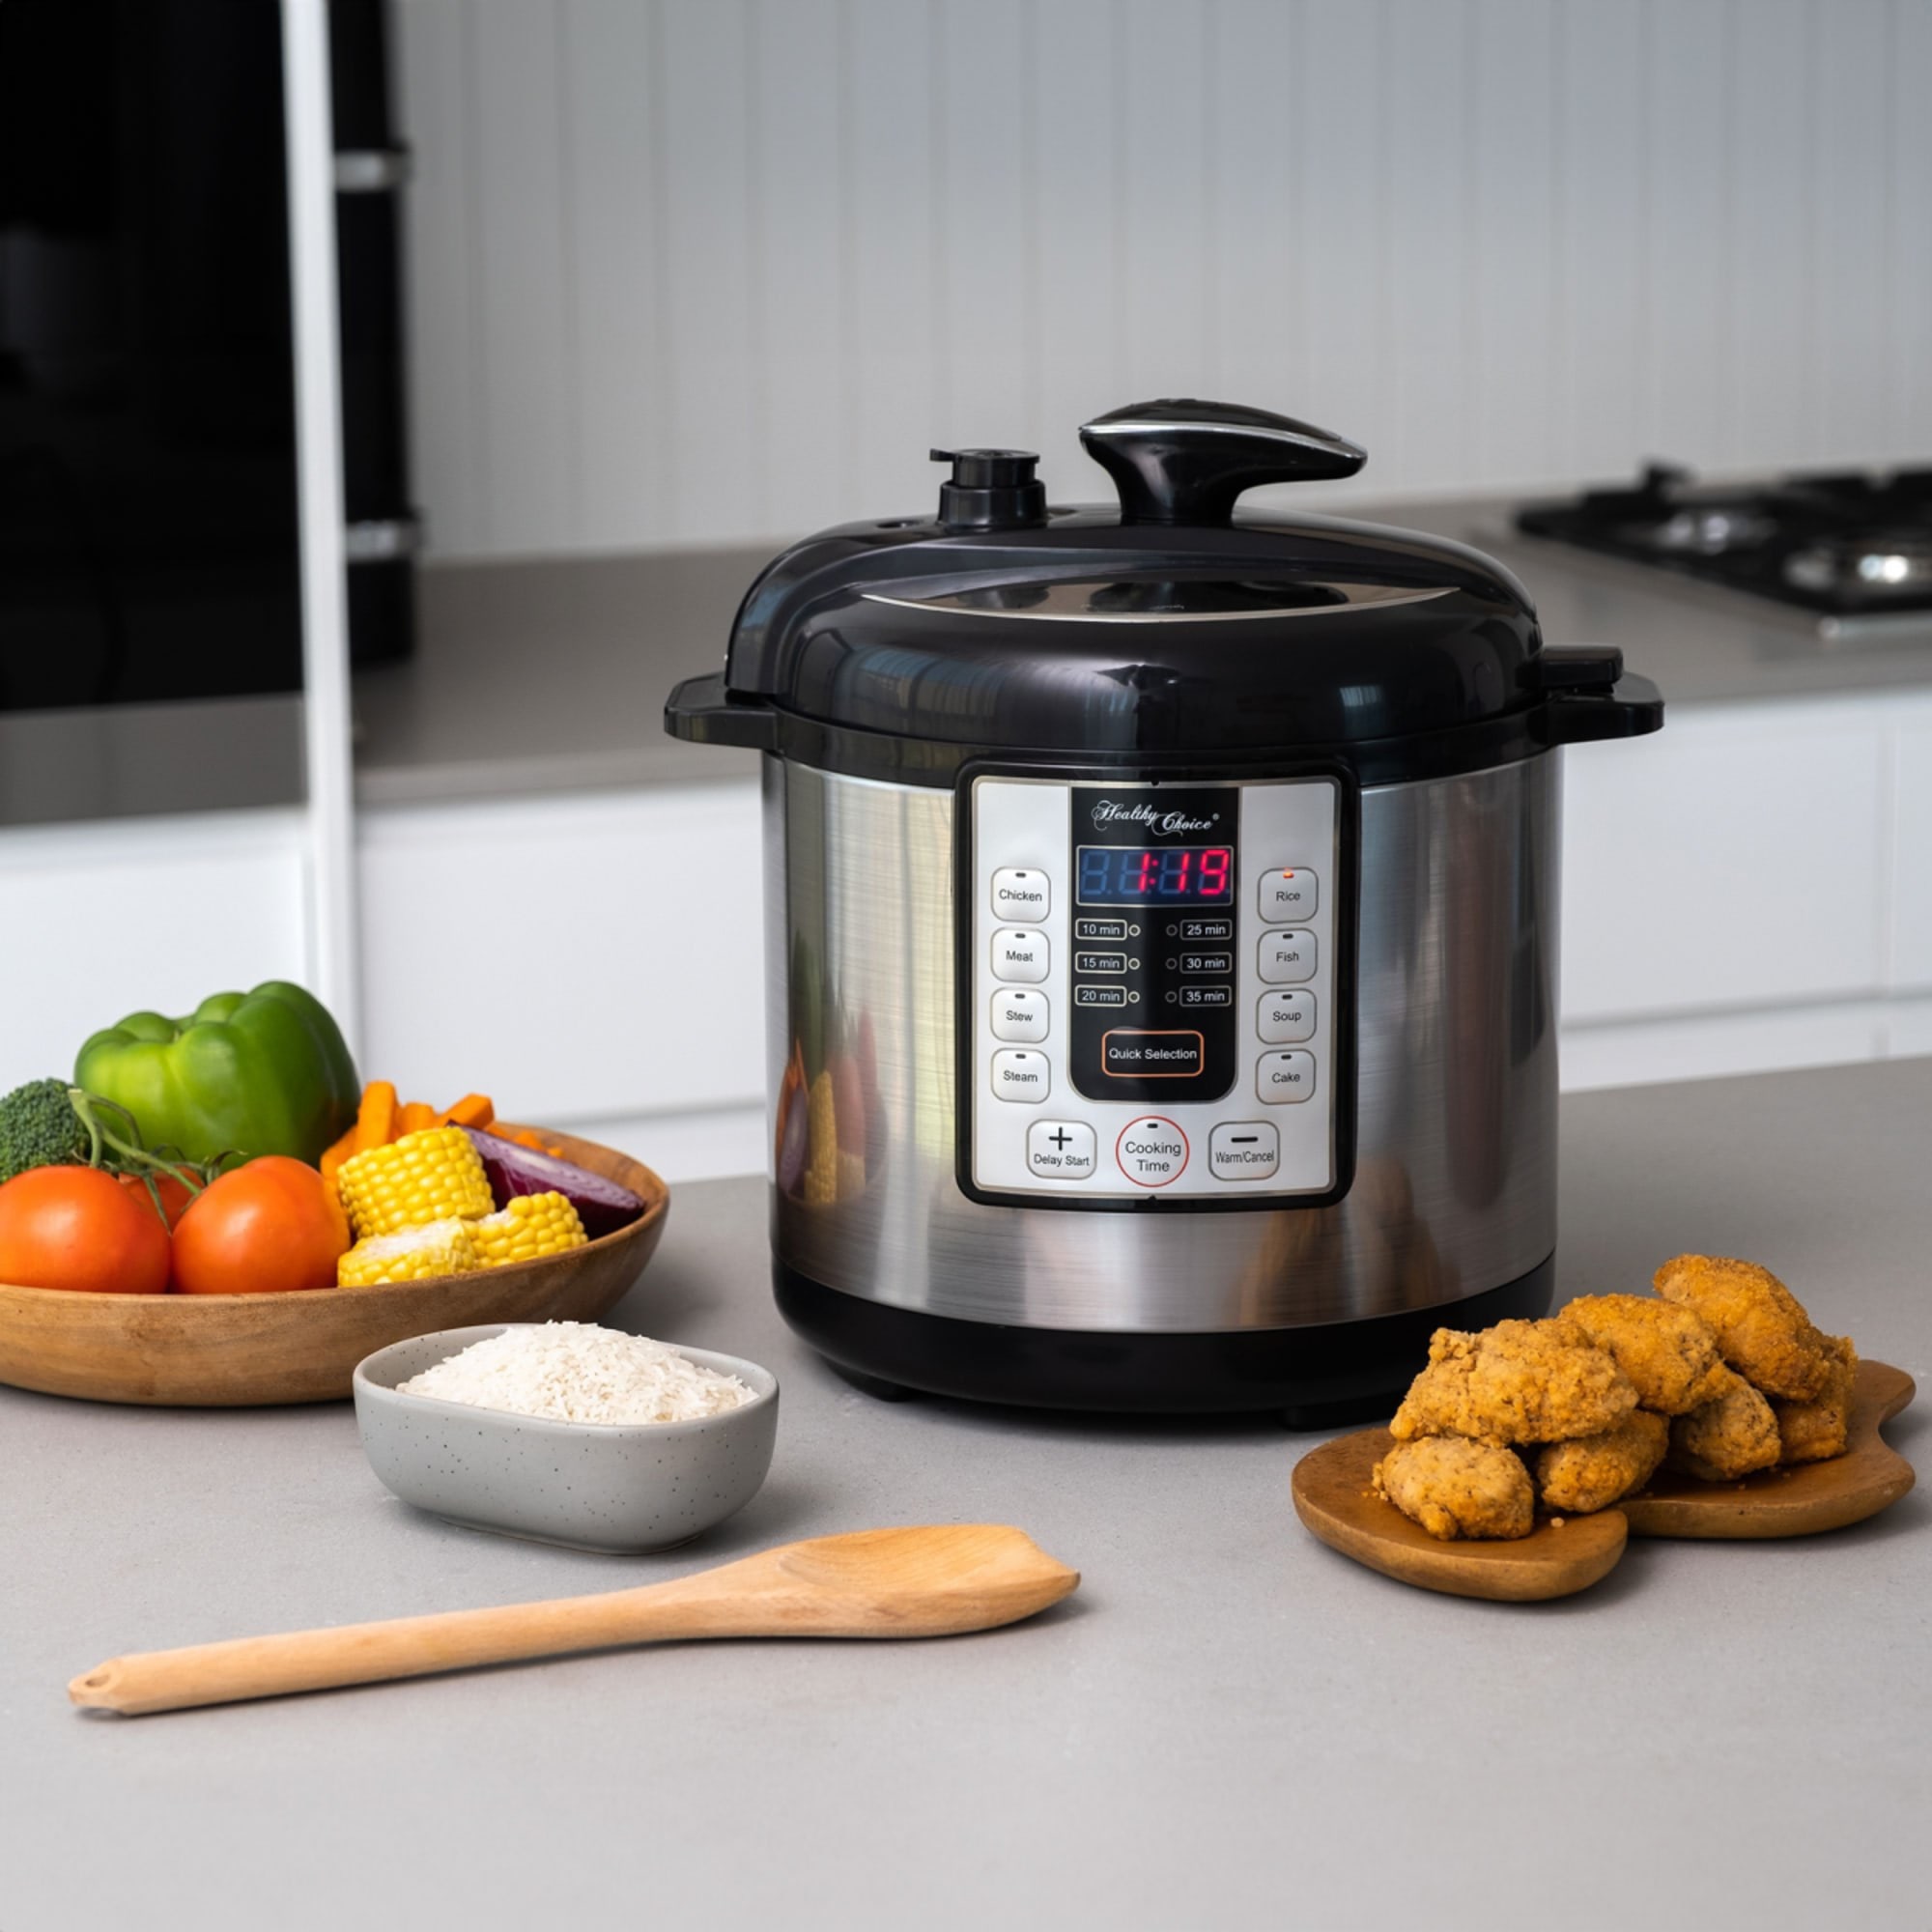 https://res.cloudinary.com/kitchenwarehouse/image/upload/c_fill,g_face,w_1250/f_auto/t_PDP_2000x2000/Supplier%20Images%20/2000px/Healthy-Choice-Pressure-Cooker-6L-Silver_2_2000px.jpg